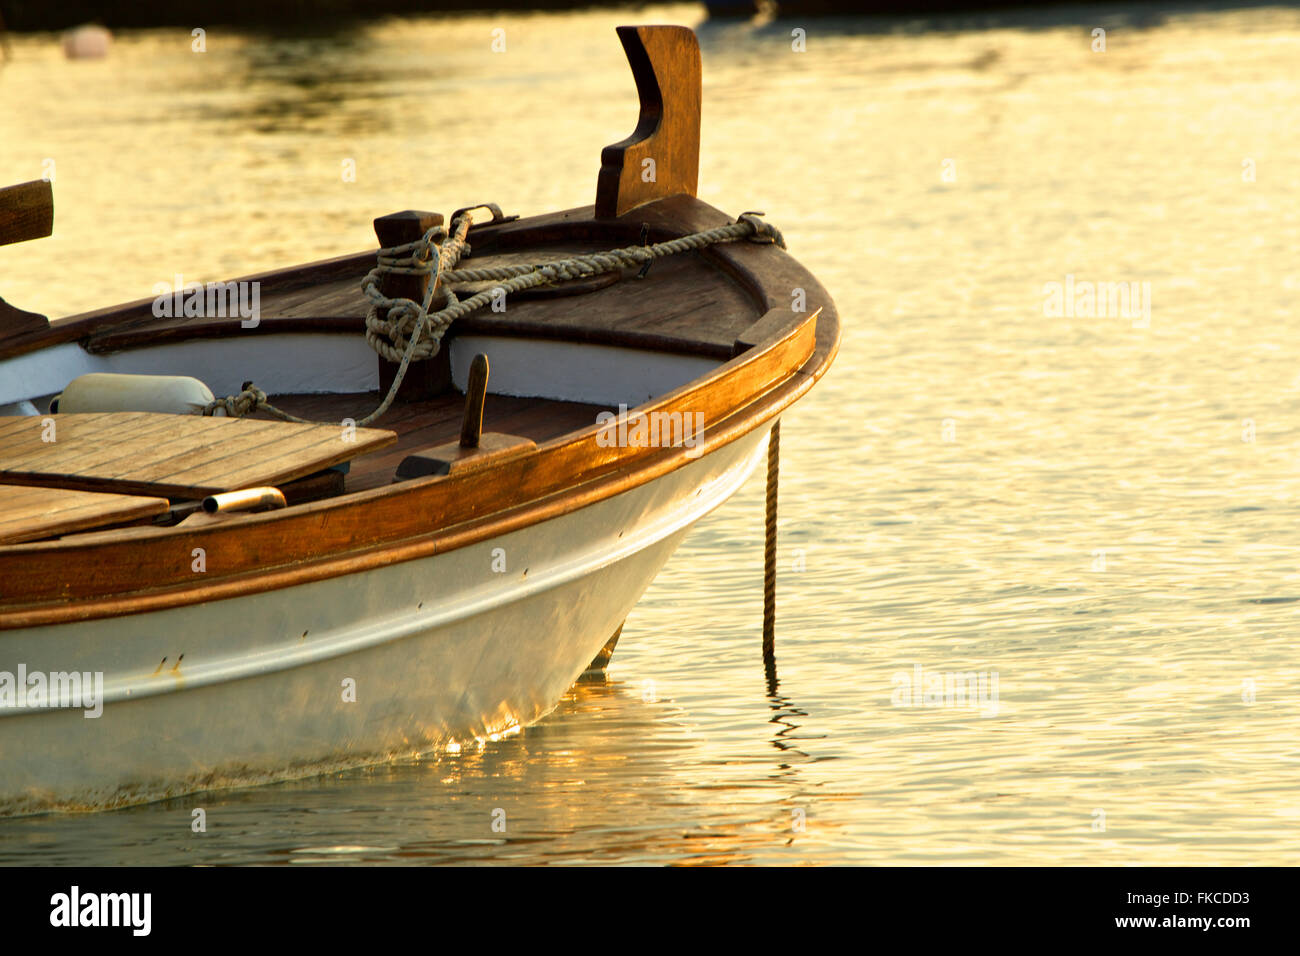 A small row boat in Greece Stock Photo